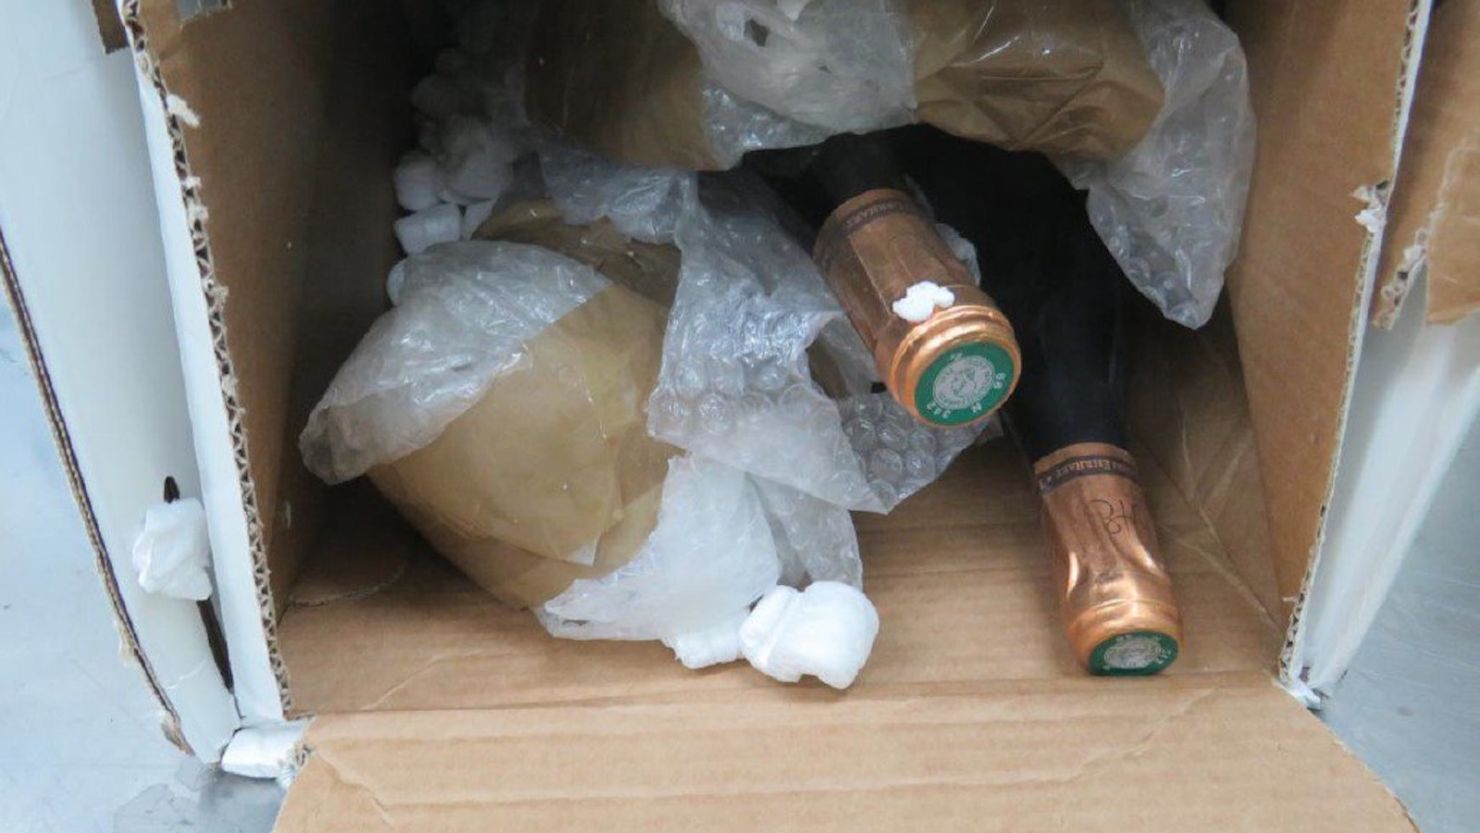 Drugs valued at 3.3 million AUD were hidden and distributed in bubble-wrapped wine bottles, potato chip packets and chilli paste tubes 